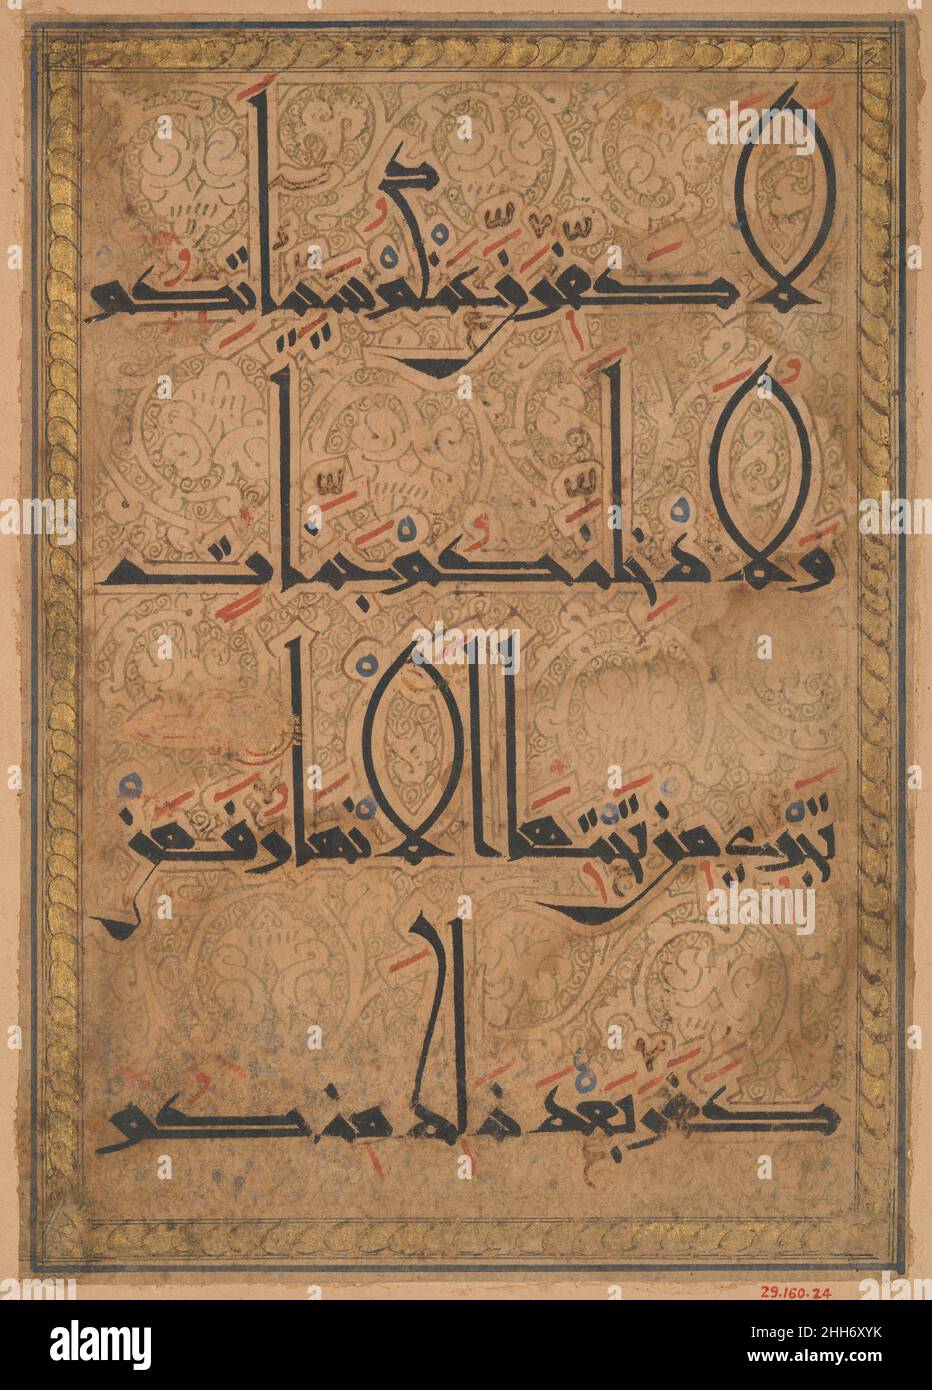 Folio from a Qur'an Manuscript ca. 1180 This folio from a dispersed Qur'an exemplifies the transition during the Seljuq period from Qur'ans written in kufic script on parchment to those copied in the more rounded new-style writing on paper. By the late twelfth century, the practitioners of the new style had perfected its mannered, slightly eccentric forms. As seen here, these include the extreme elongation of tall letters and the ellipse formed by combining two of these letters, lam and alif.. Folio from a Qur'an Manuscript  448282 Stock Photo